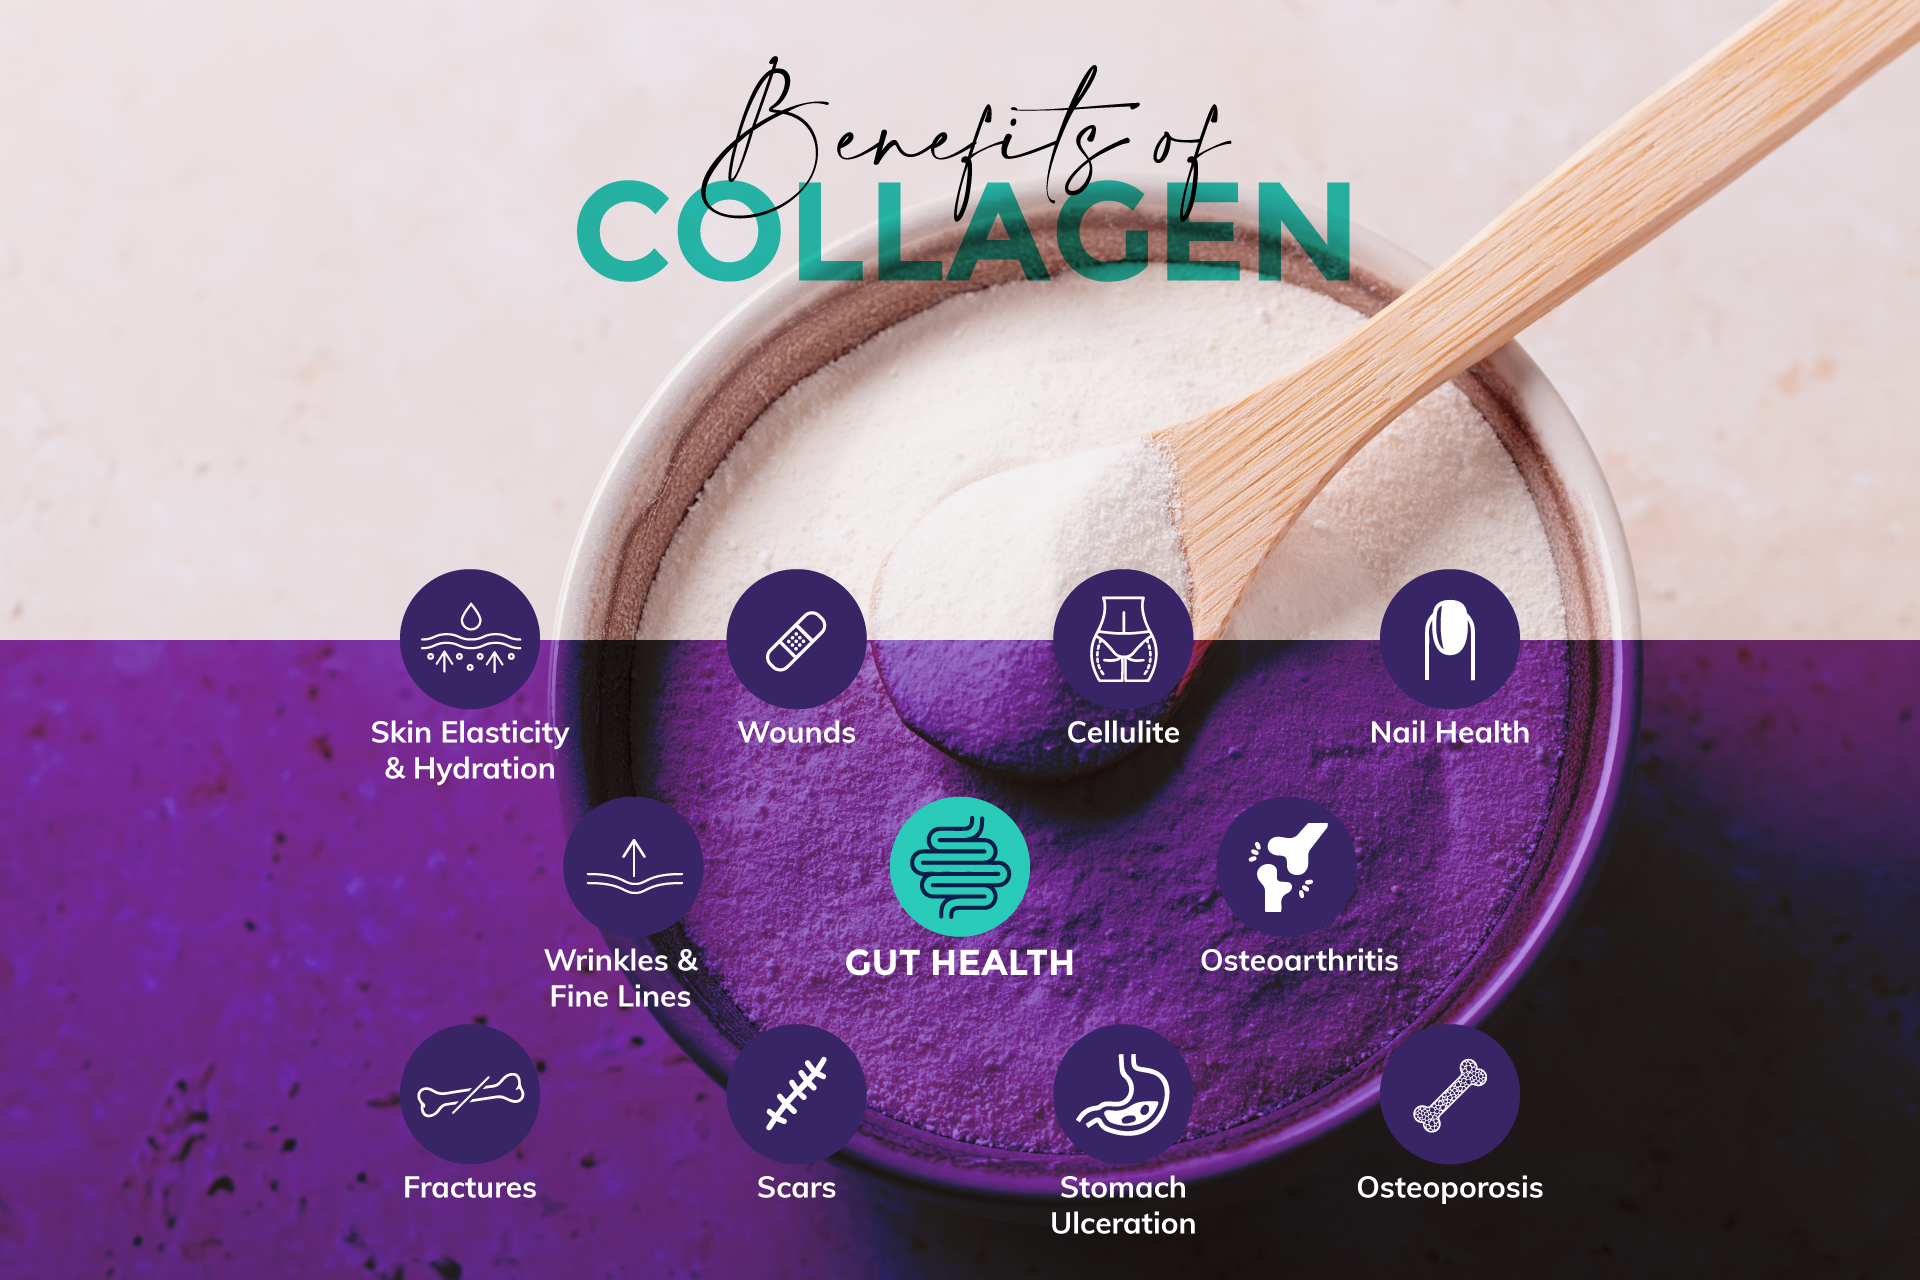 The important role collagen plays for a happy and healthy gut